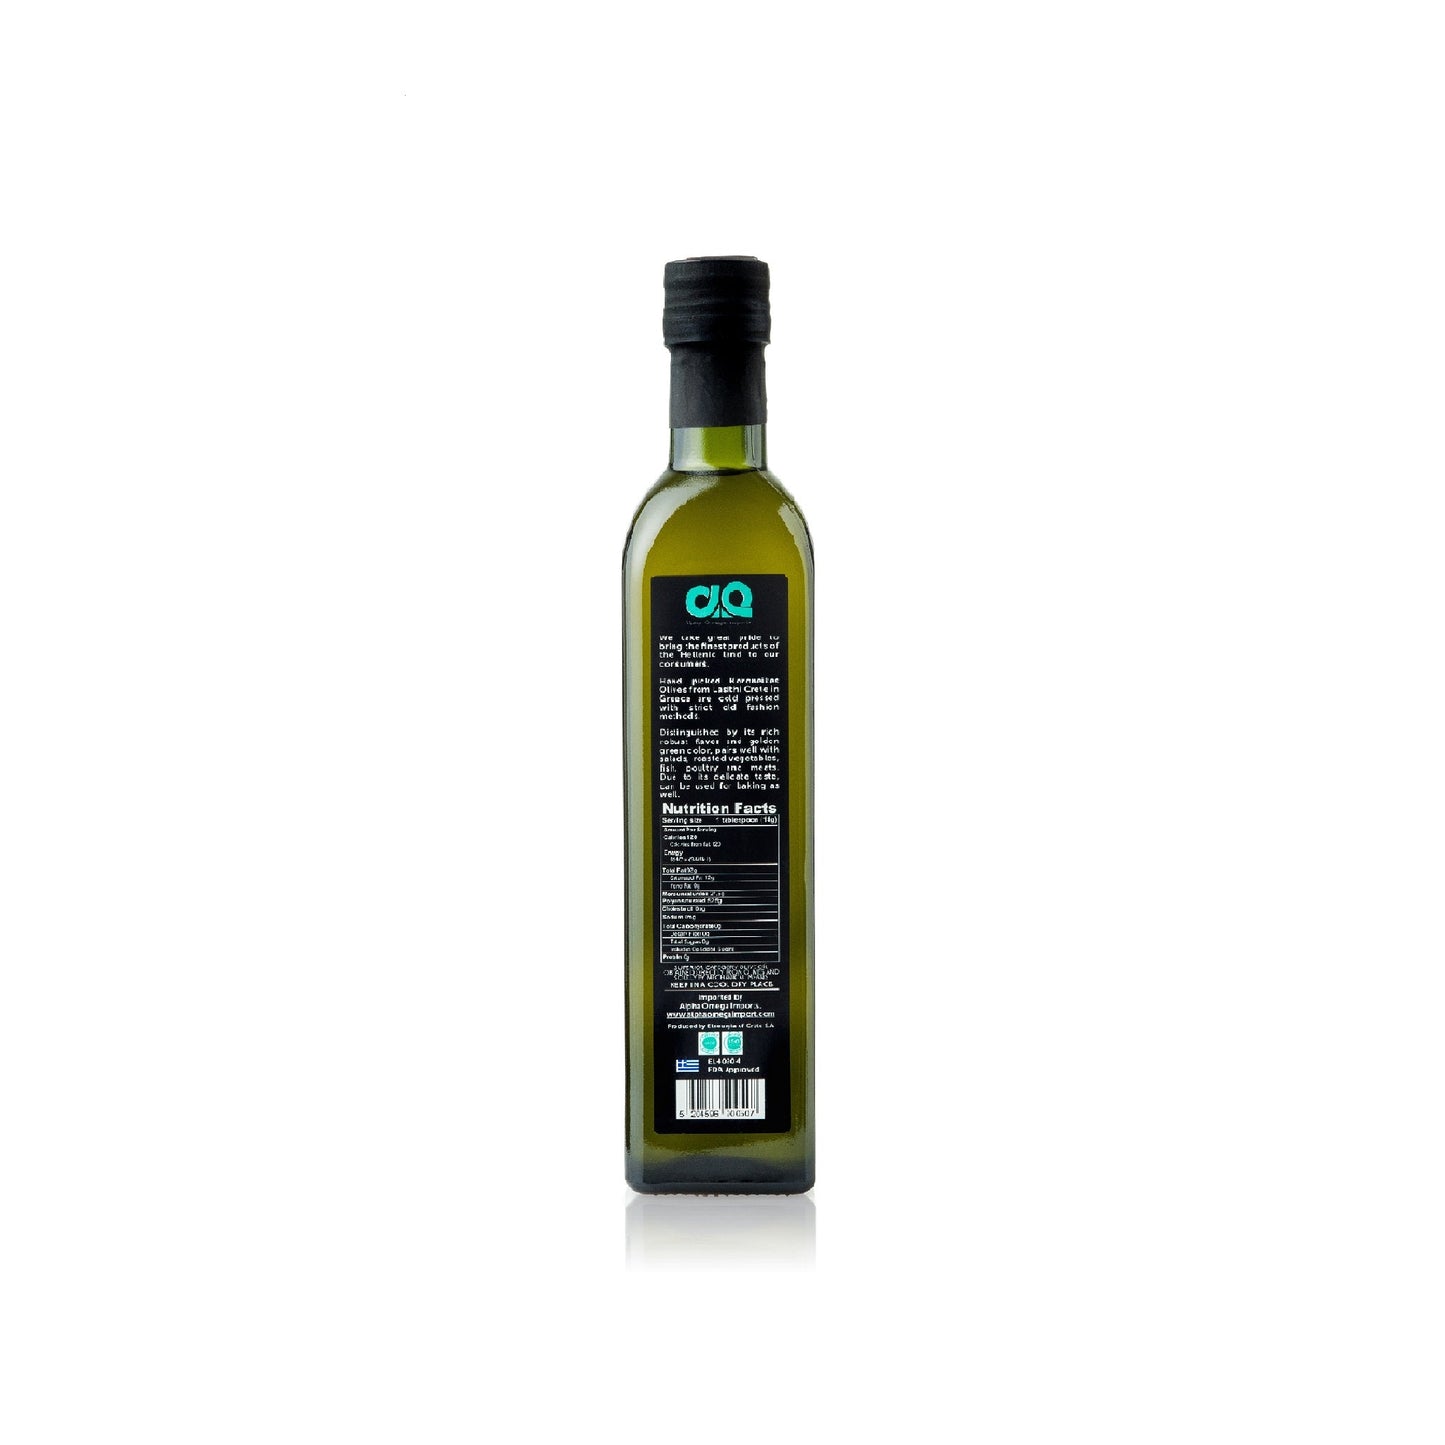 Eliovi Extra Virgin Olive Oil from Eastern Crete 16.9 Fl. Oz - Premium Quality, First Cold-Pressed Koroneiki Olives by Alpha Omega Imports